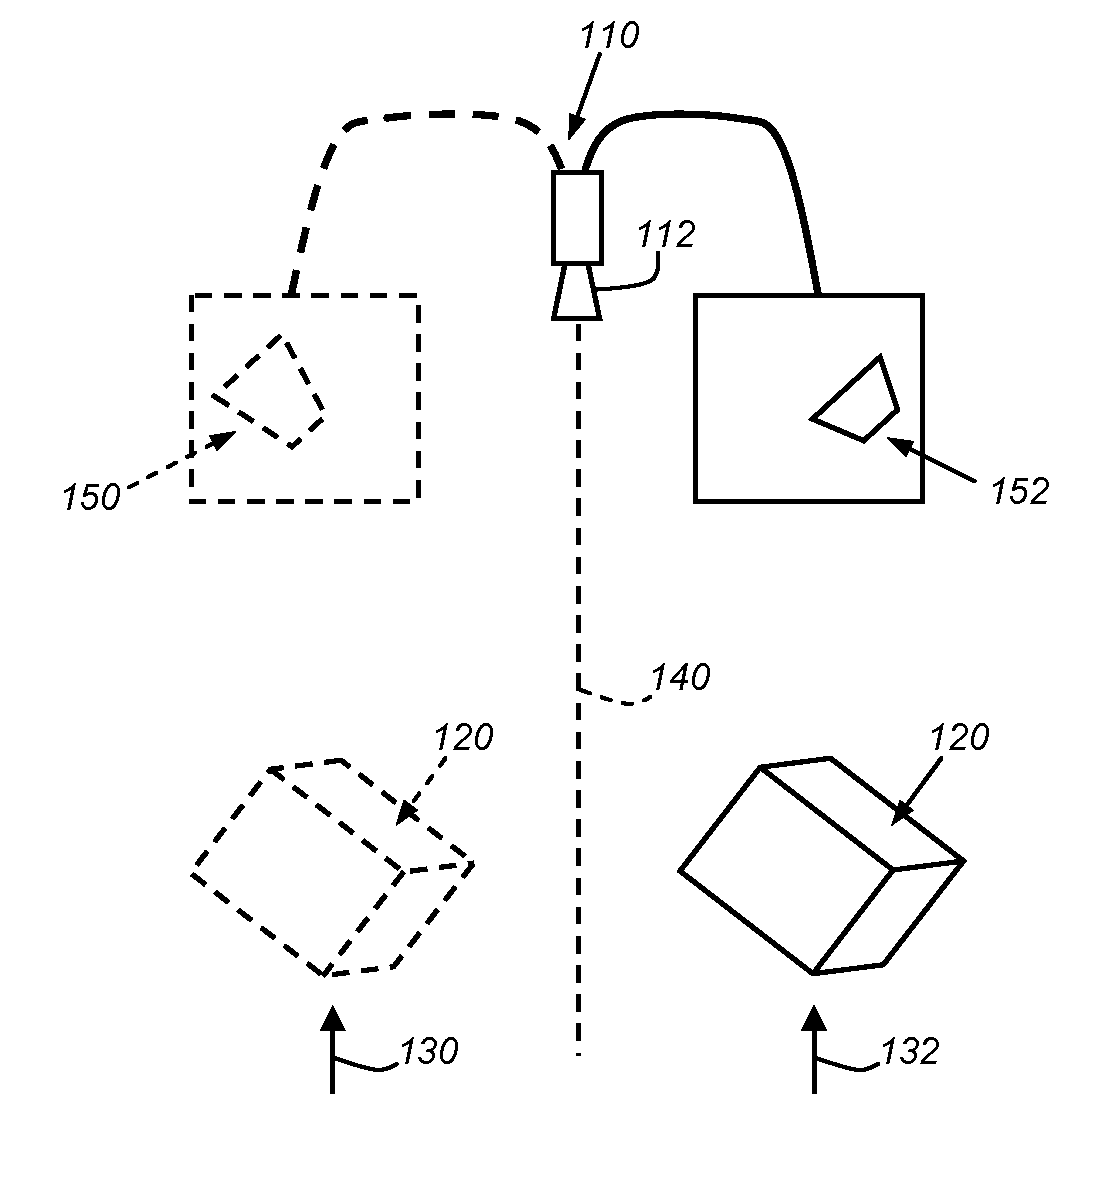 System and method for finding correspondence between cameras in a three-dimensional vision system